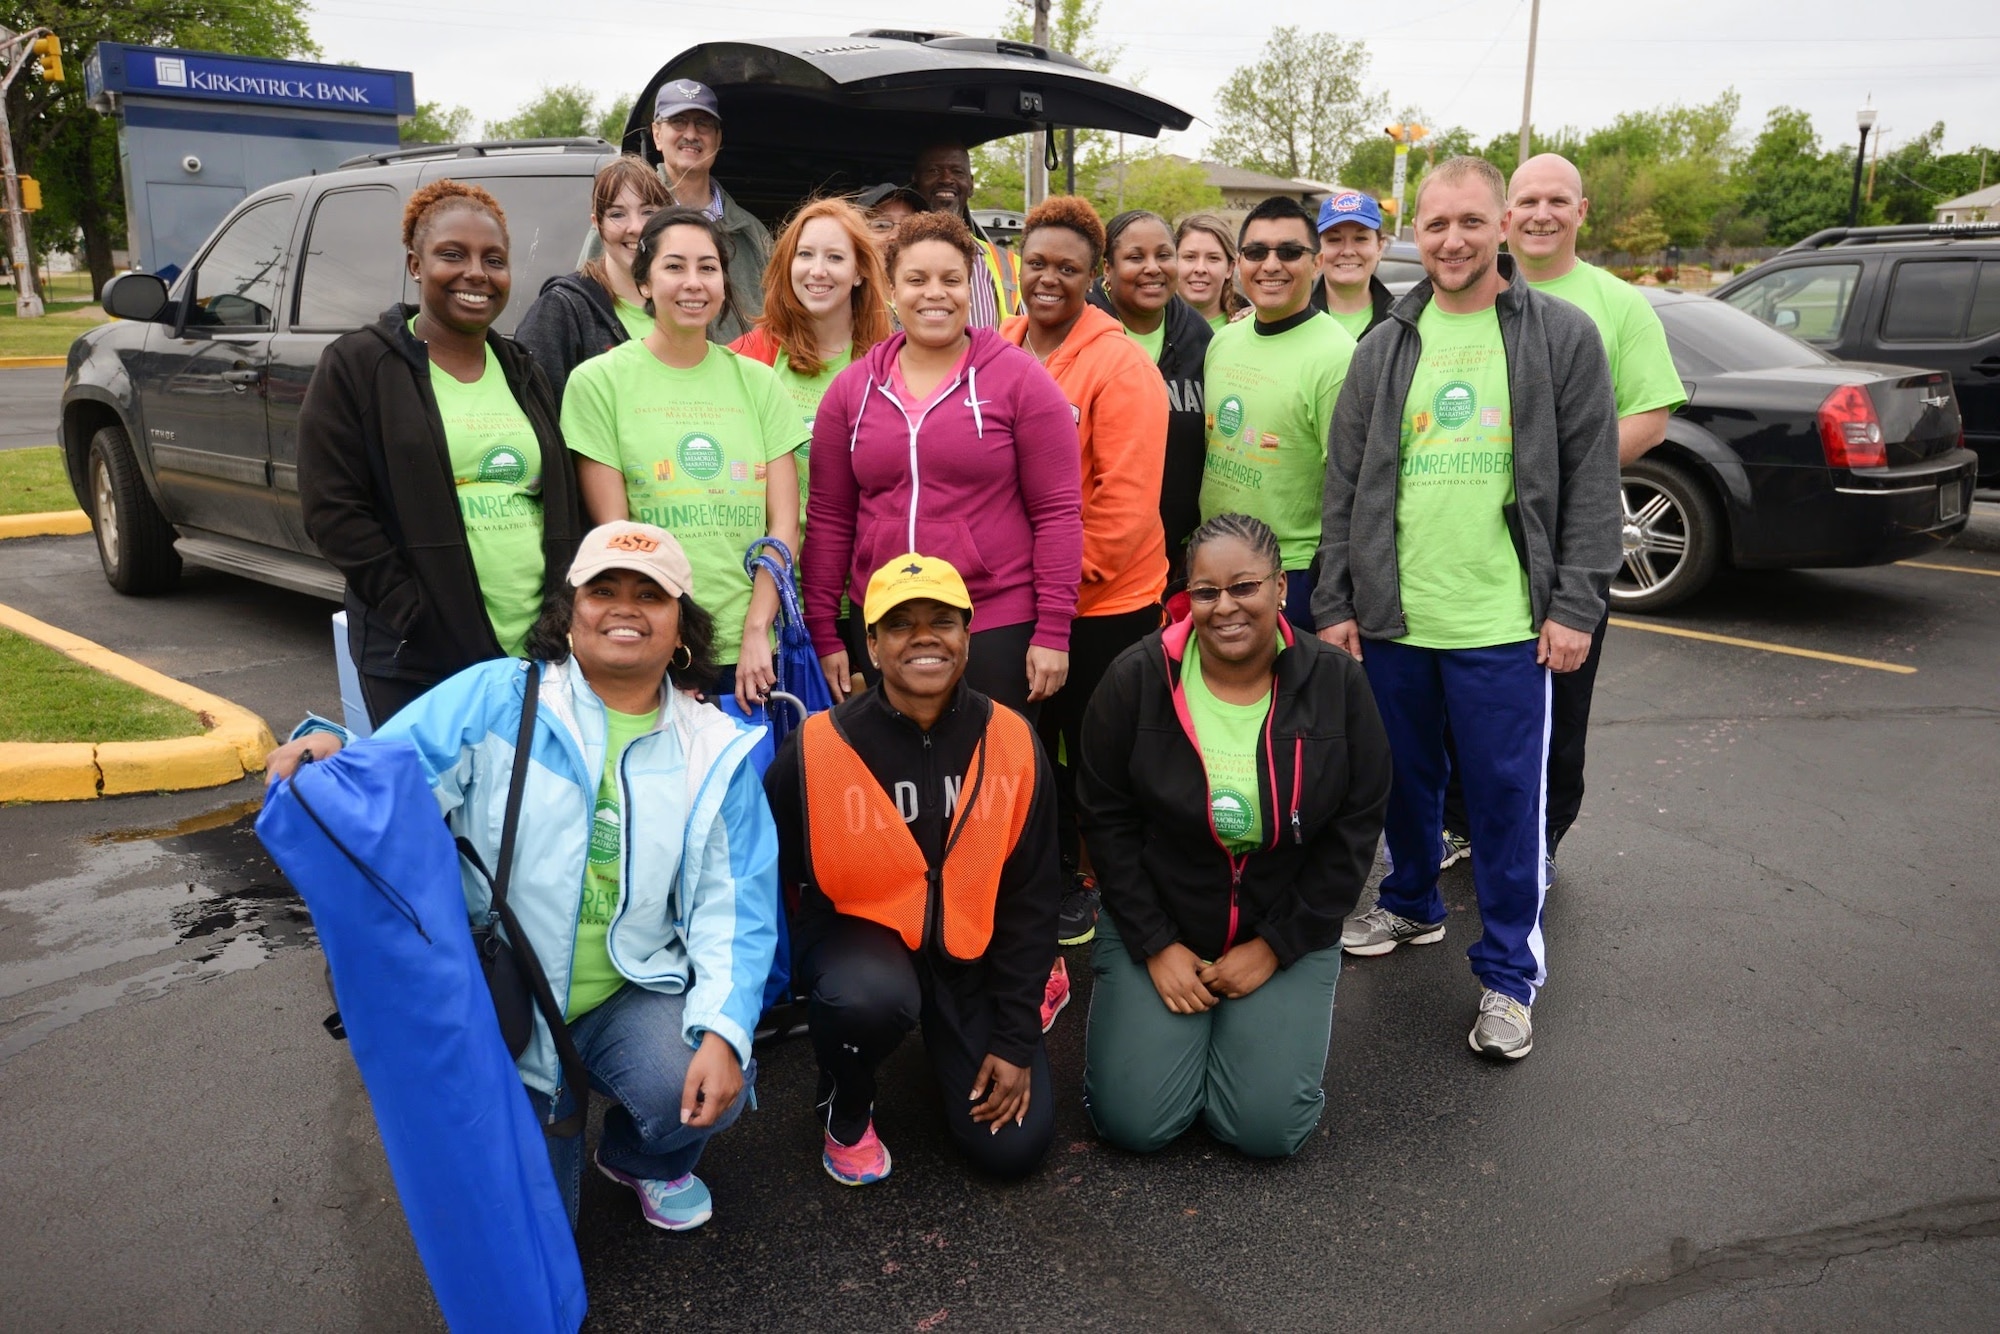 Chief Master Sgt. Takesha Williams, 507th Air Refueling Wing budget analyst, 931st ARW command chief and Reserve course marshal for the Oklahoma City Memorial Marathon, kneels in an orange vest for a photograph with other course marshal volunteers April 26, 2015, in Oklahoma City, Oklahoma. For more than a decade, Williams has been responsible for gathering Reserve volunteers to help manage the course during the marathon. (U.S. Air Force courtesy photo)